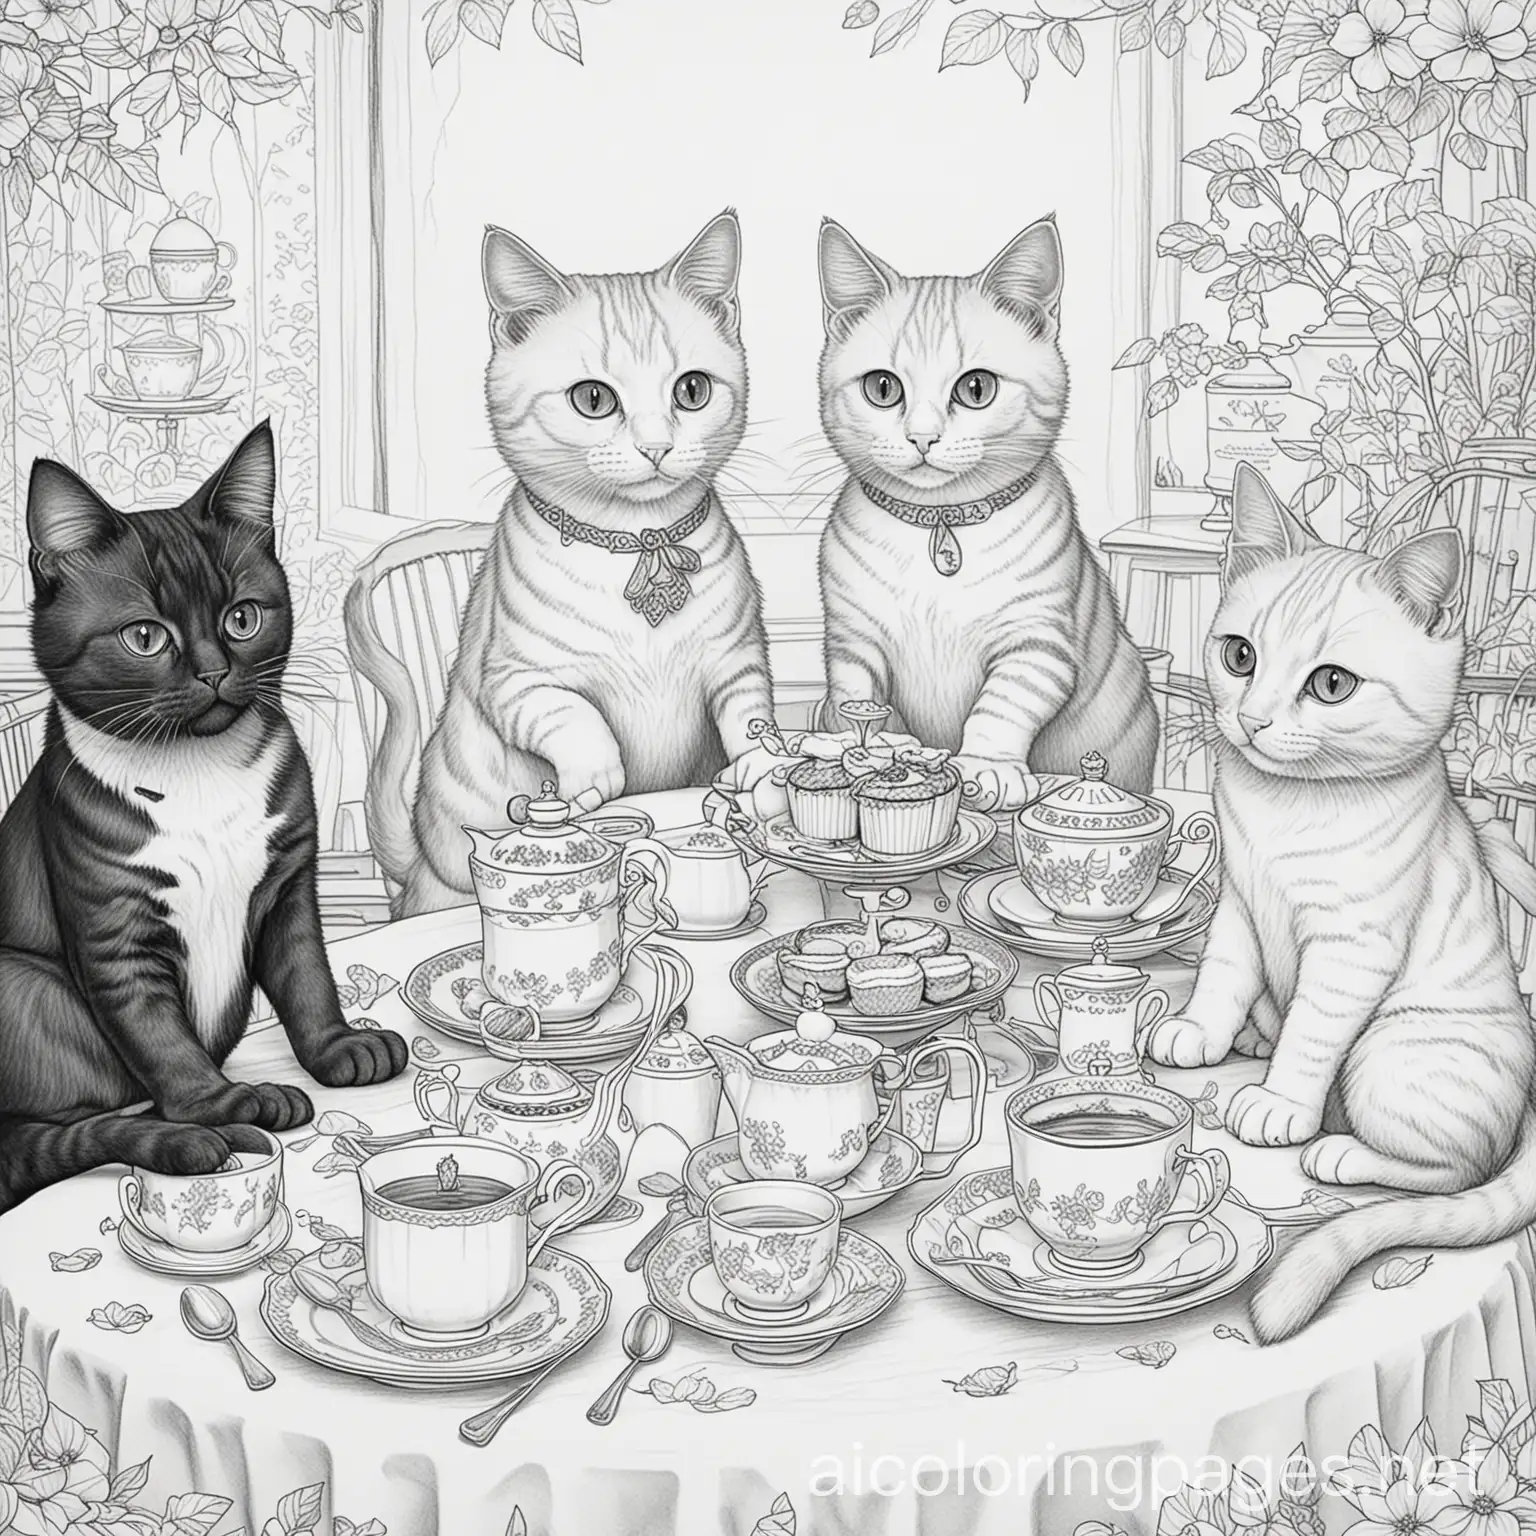 Generate a coloring page with cats at a tea party with exactly 97 pieces to color, Coloring Page, black and white, line art, white background, Simplicity, Ample White Space.